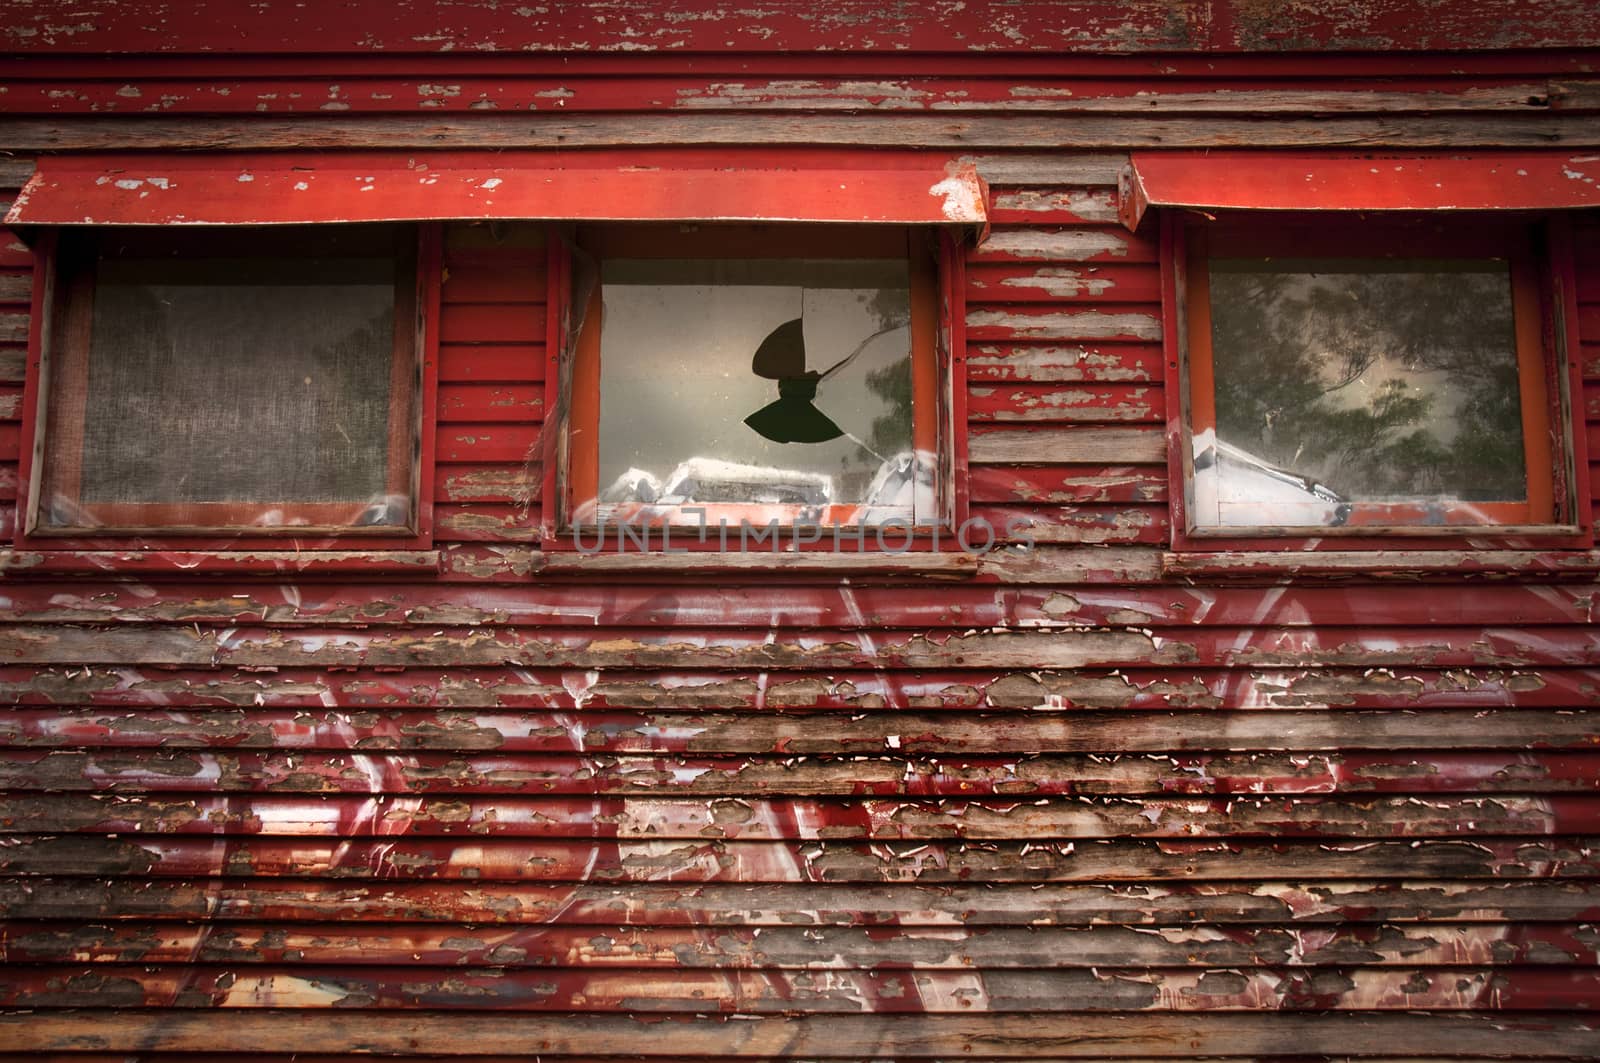 Abandoned train with broken windows by Teelahview